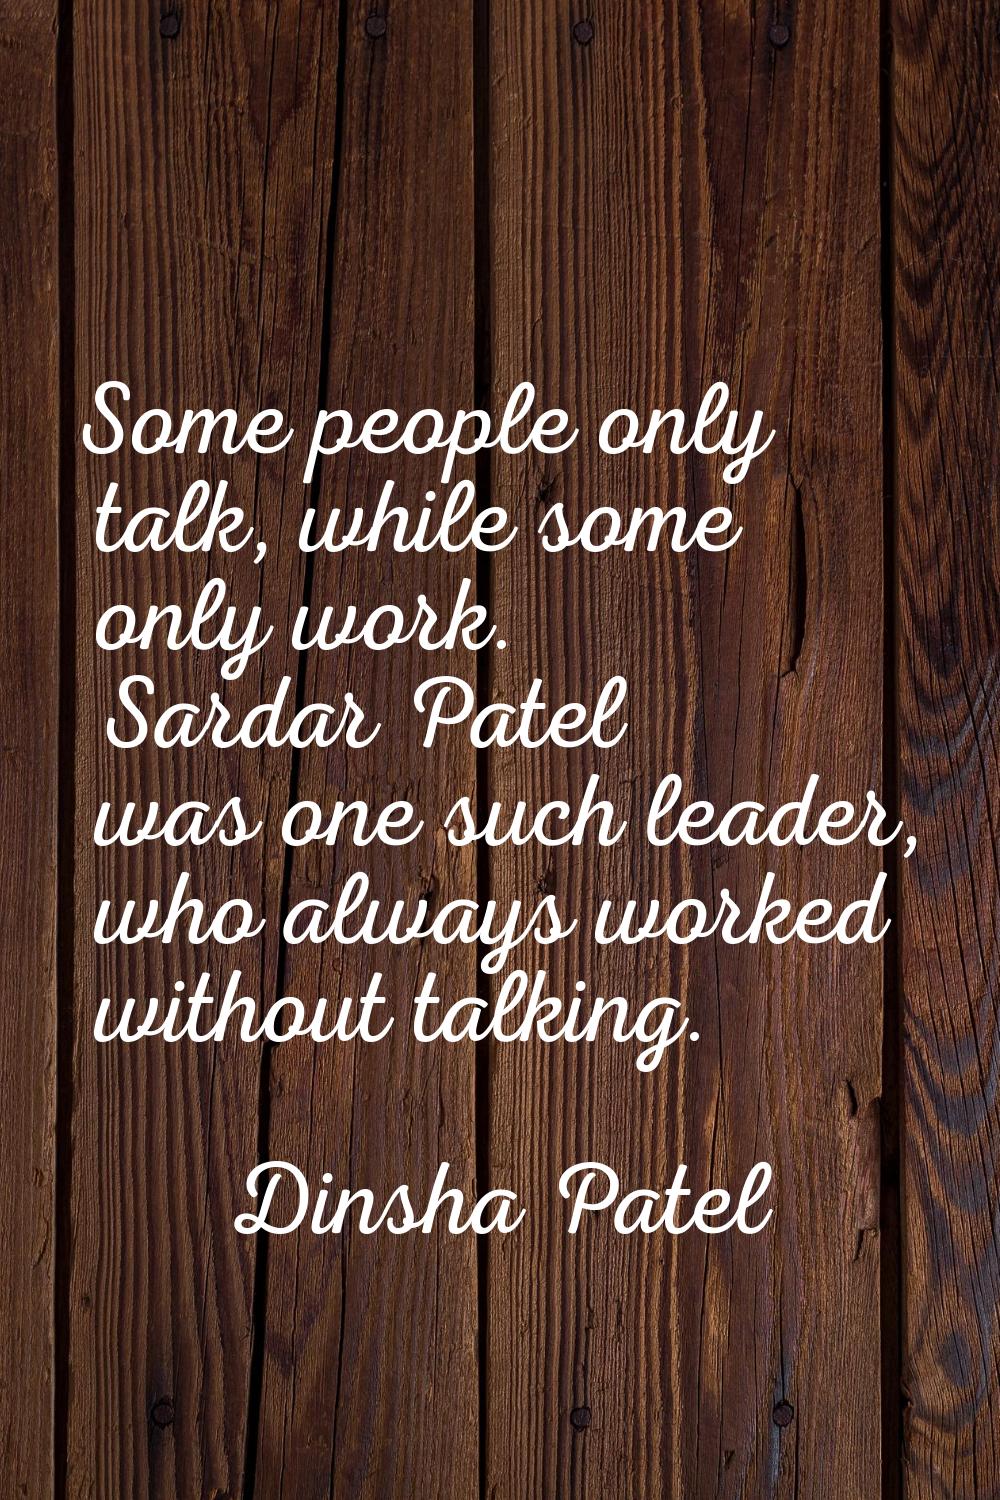 Some people only talk, while some only work. Sardar Patel was one such leader, who always worked wi